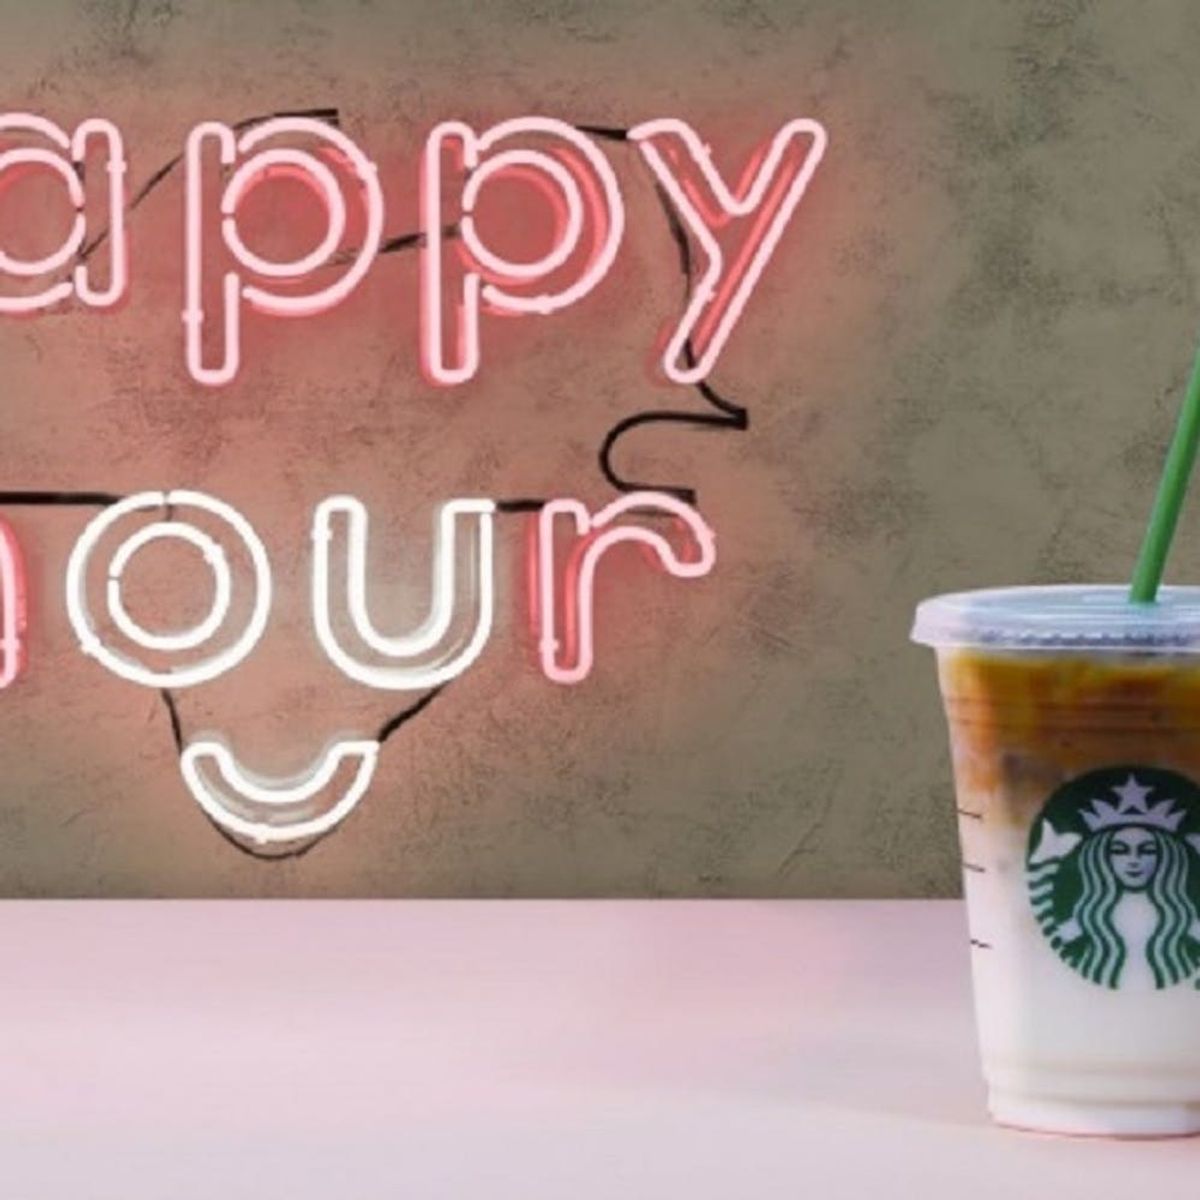 Starbucks Brings Back Happy Hour for Affordable Afternoon Caffeine Fixes